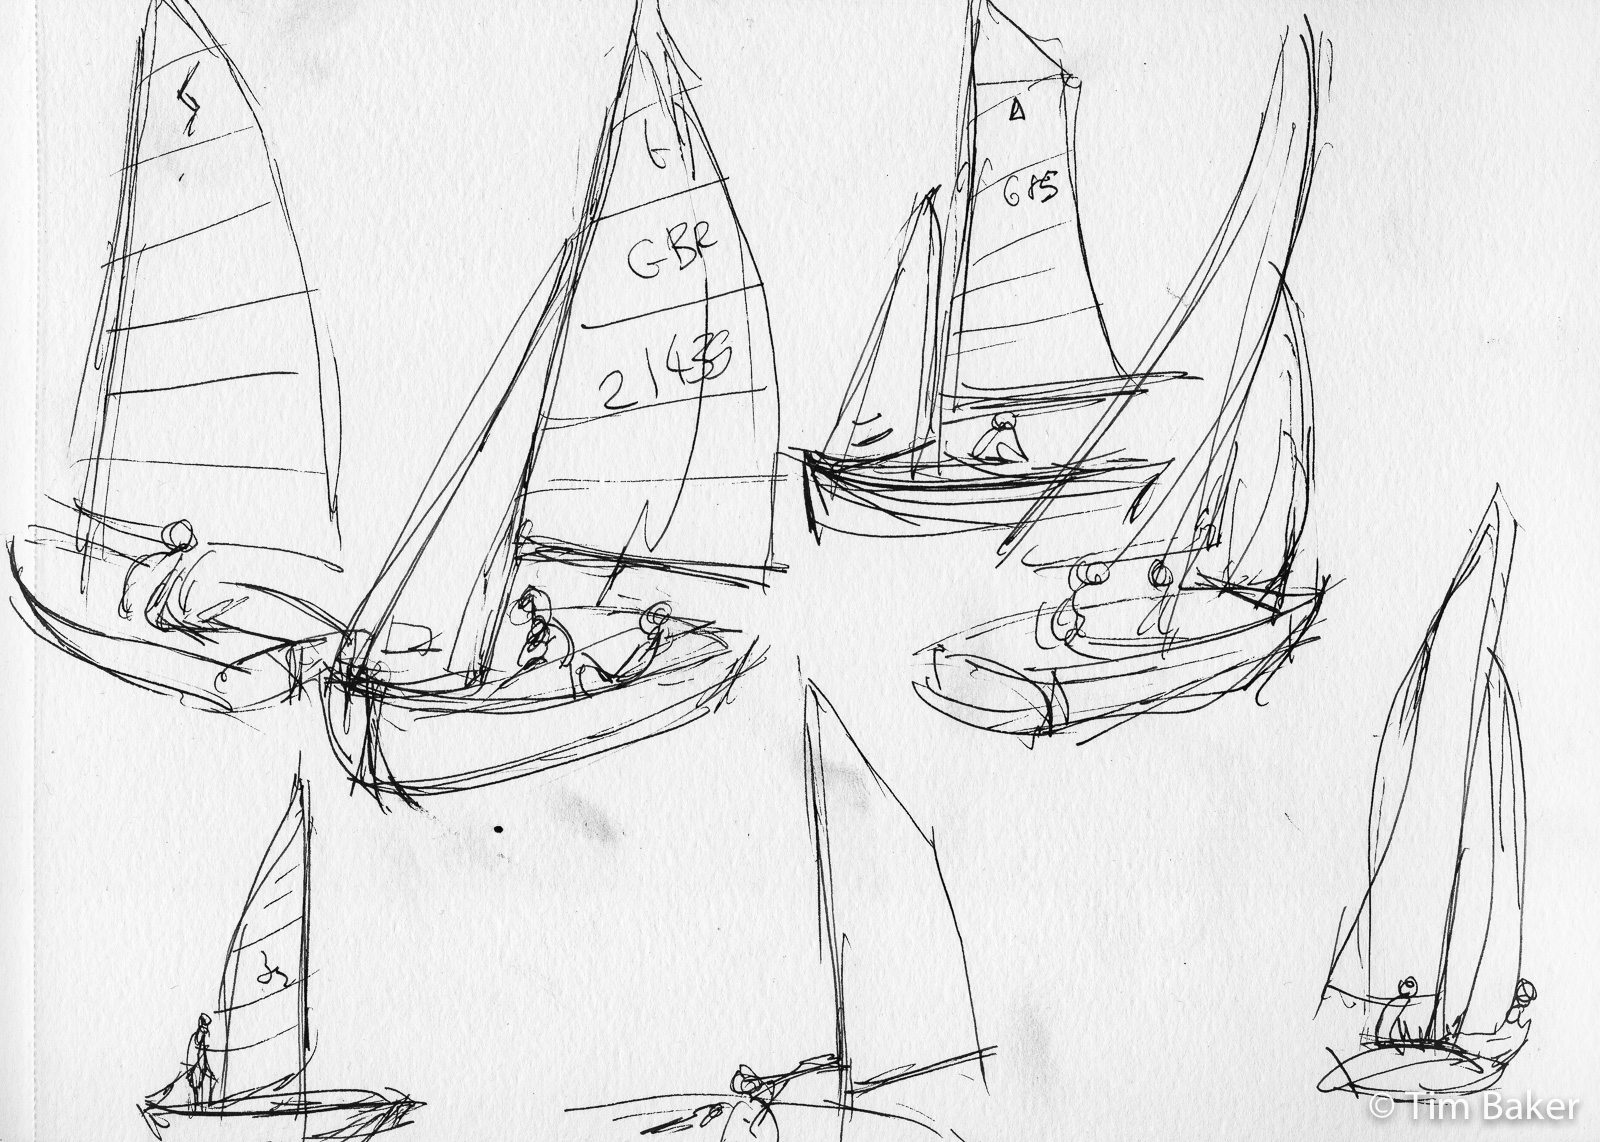 Dinghy Studies, Fountain Pen, Fabriano Mixed Media, A4